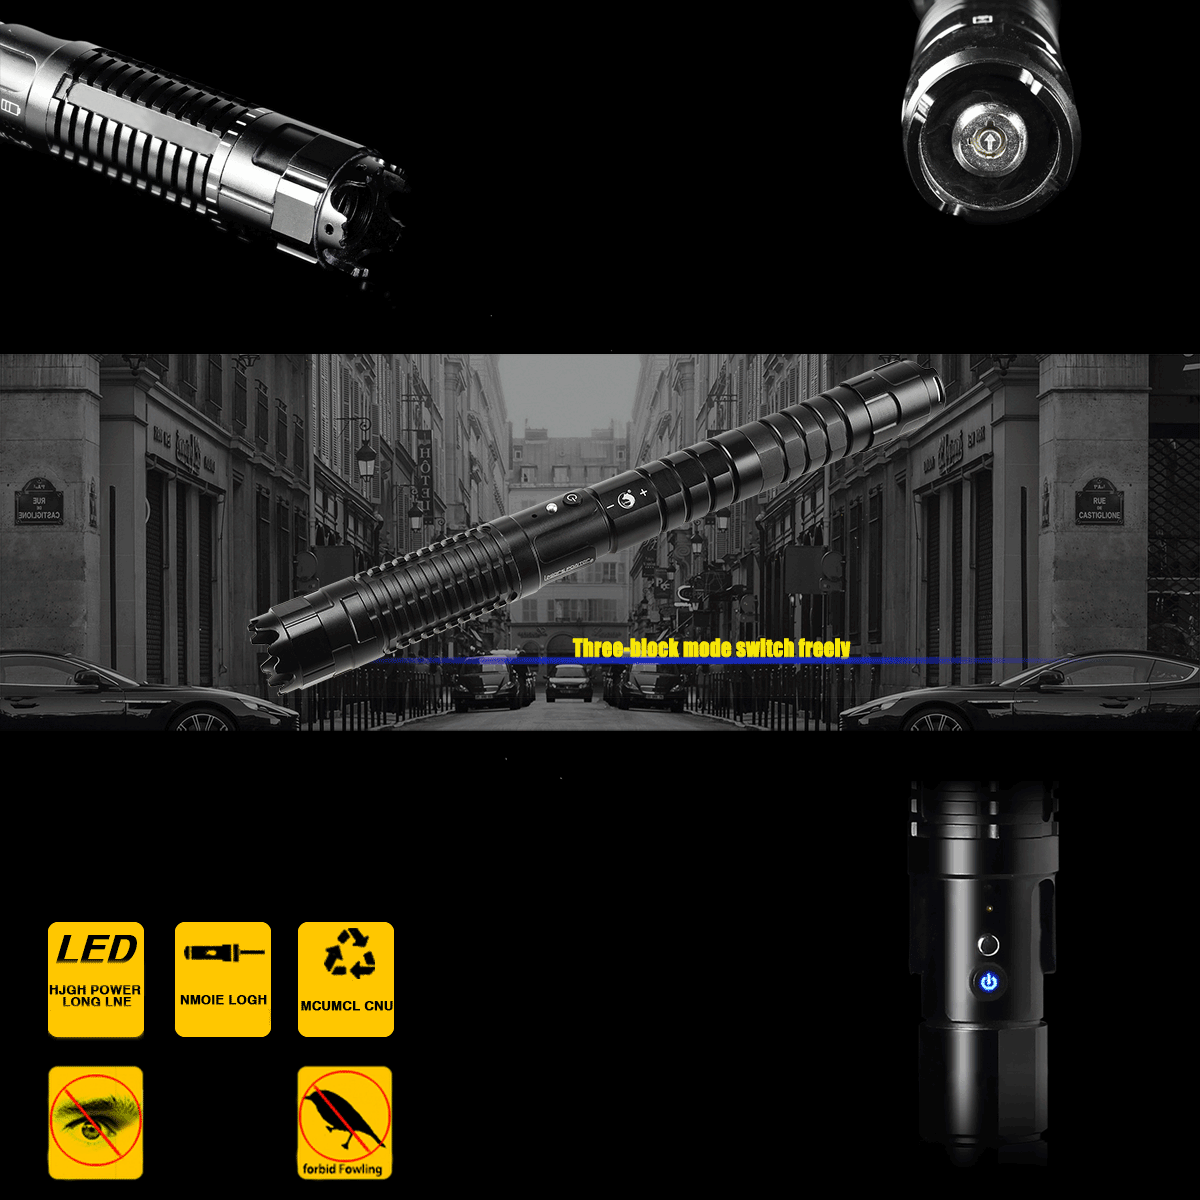 UKing ZQ-j8 10000mW 445nm Blue Beam 3-Mode Zoomable 5-in-1 Laser Pointer Pen Kit Negro